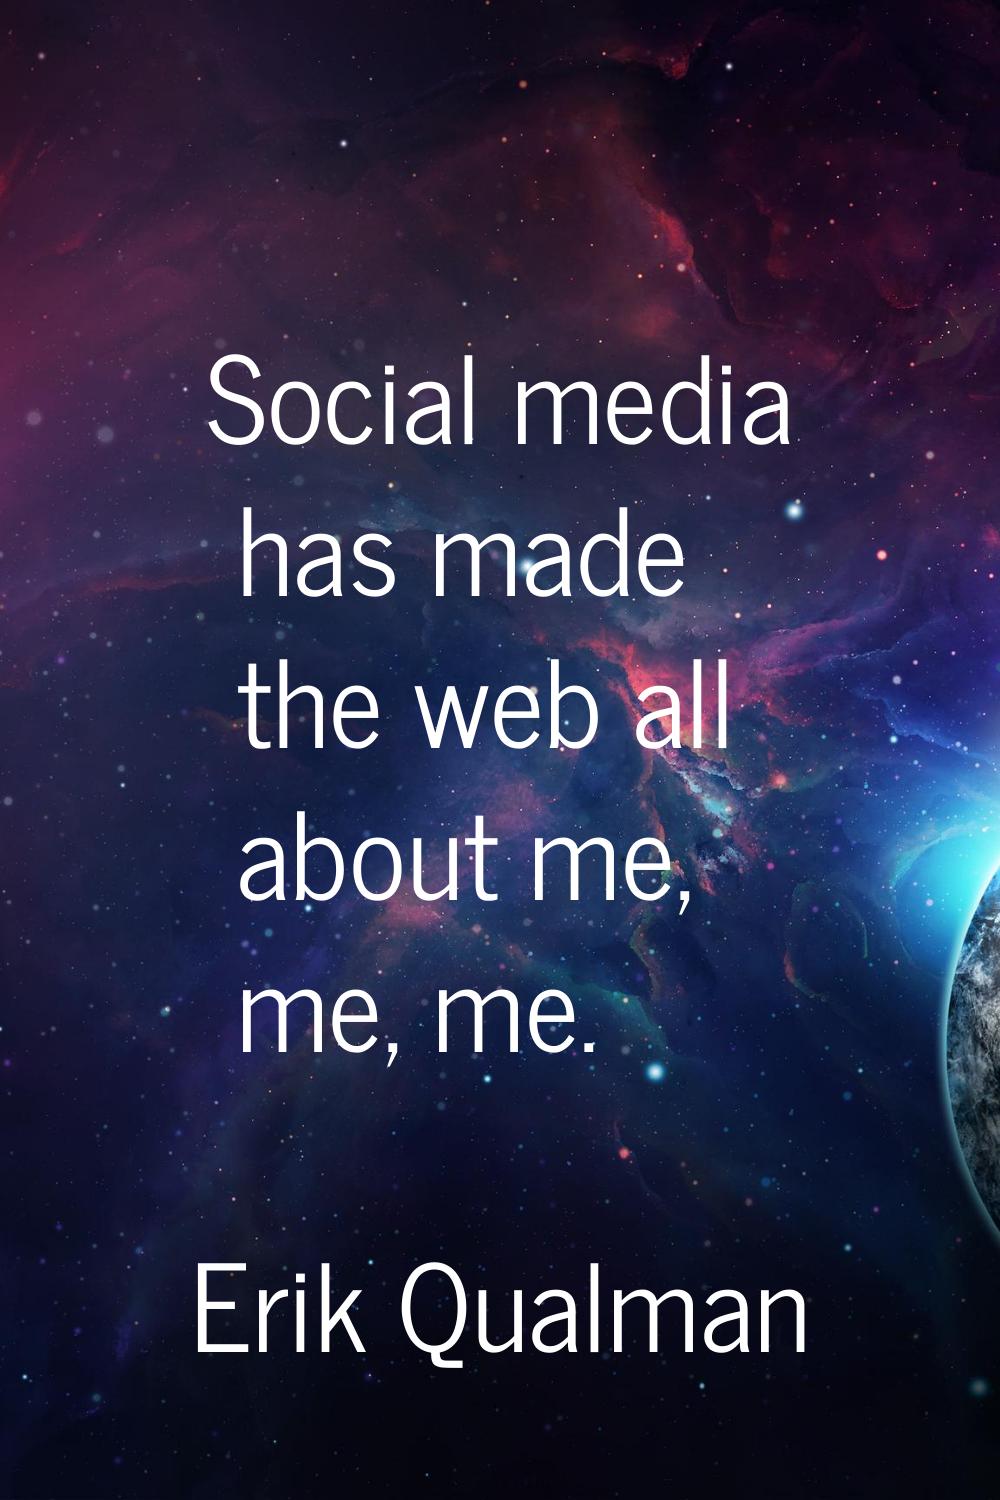 Social media has made the web all about me, me, me.